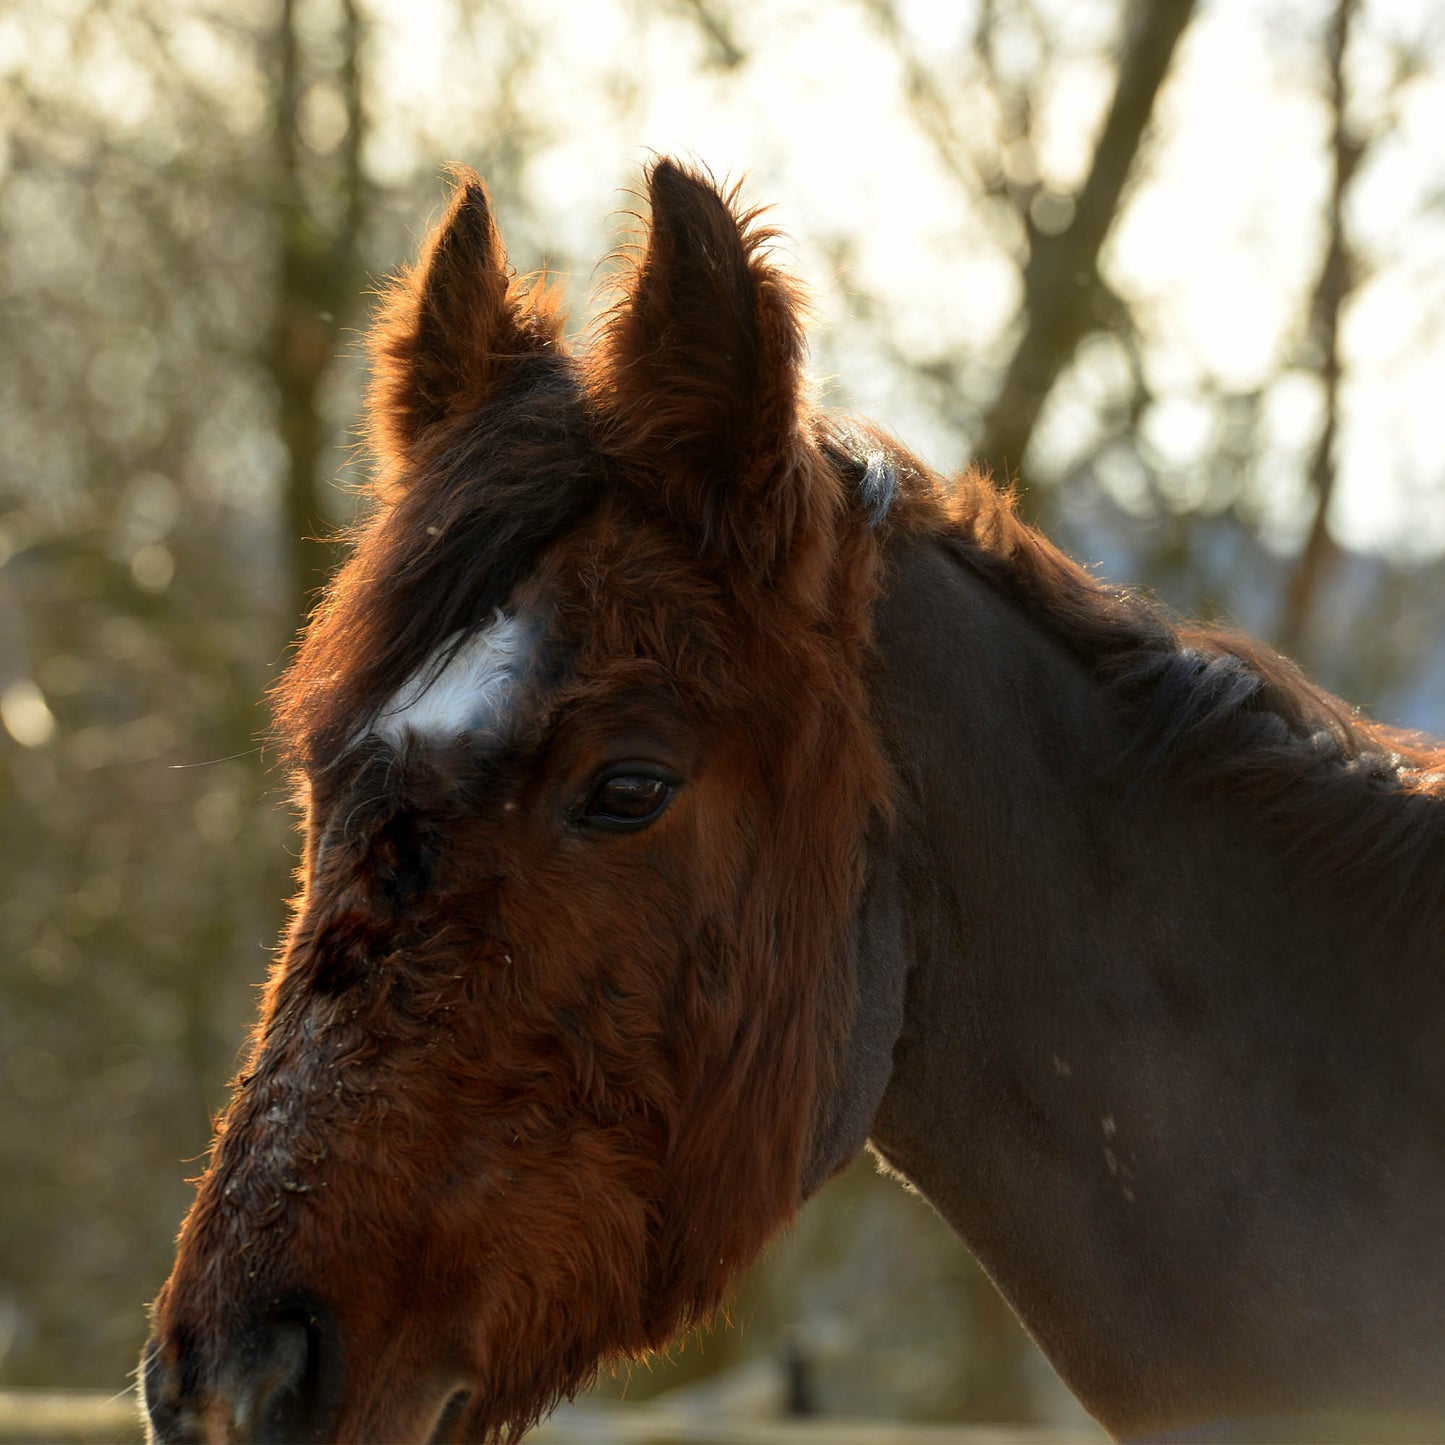 Provide Essential Supplies To Horses in Need